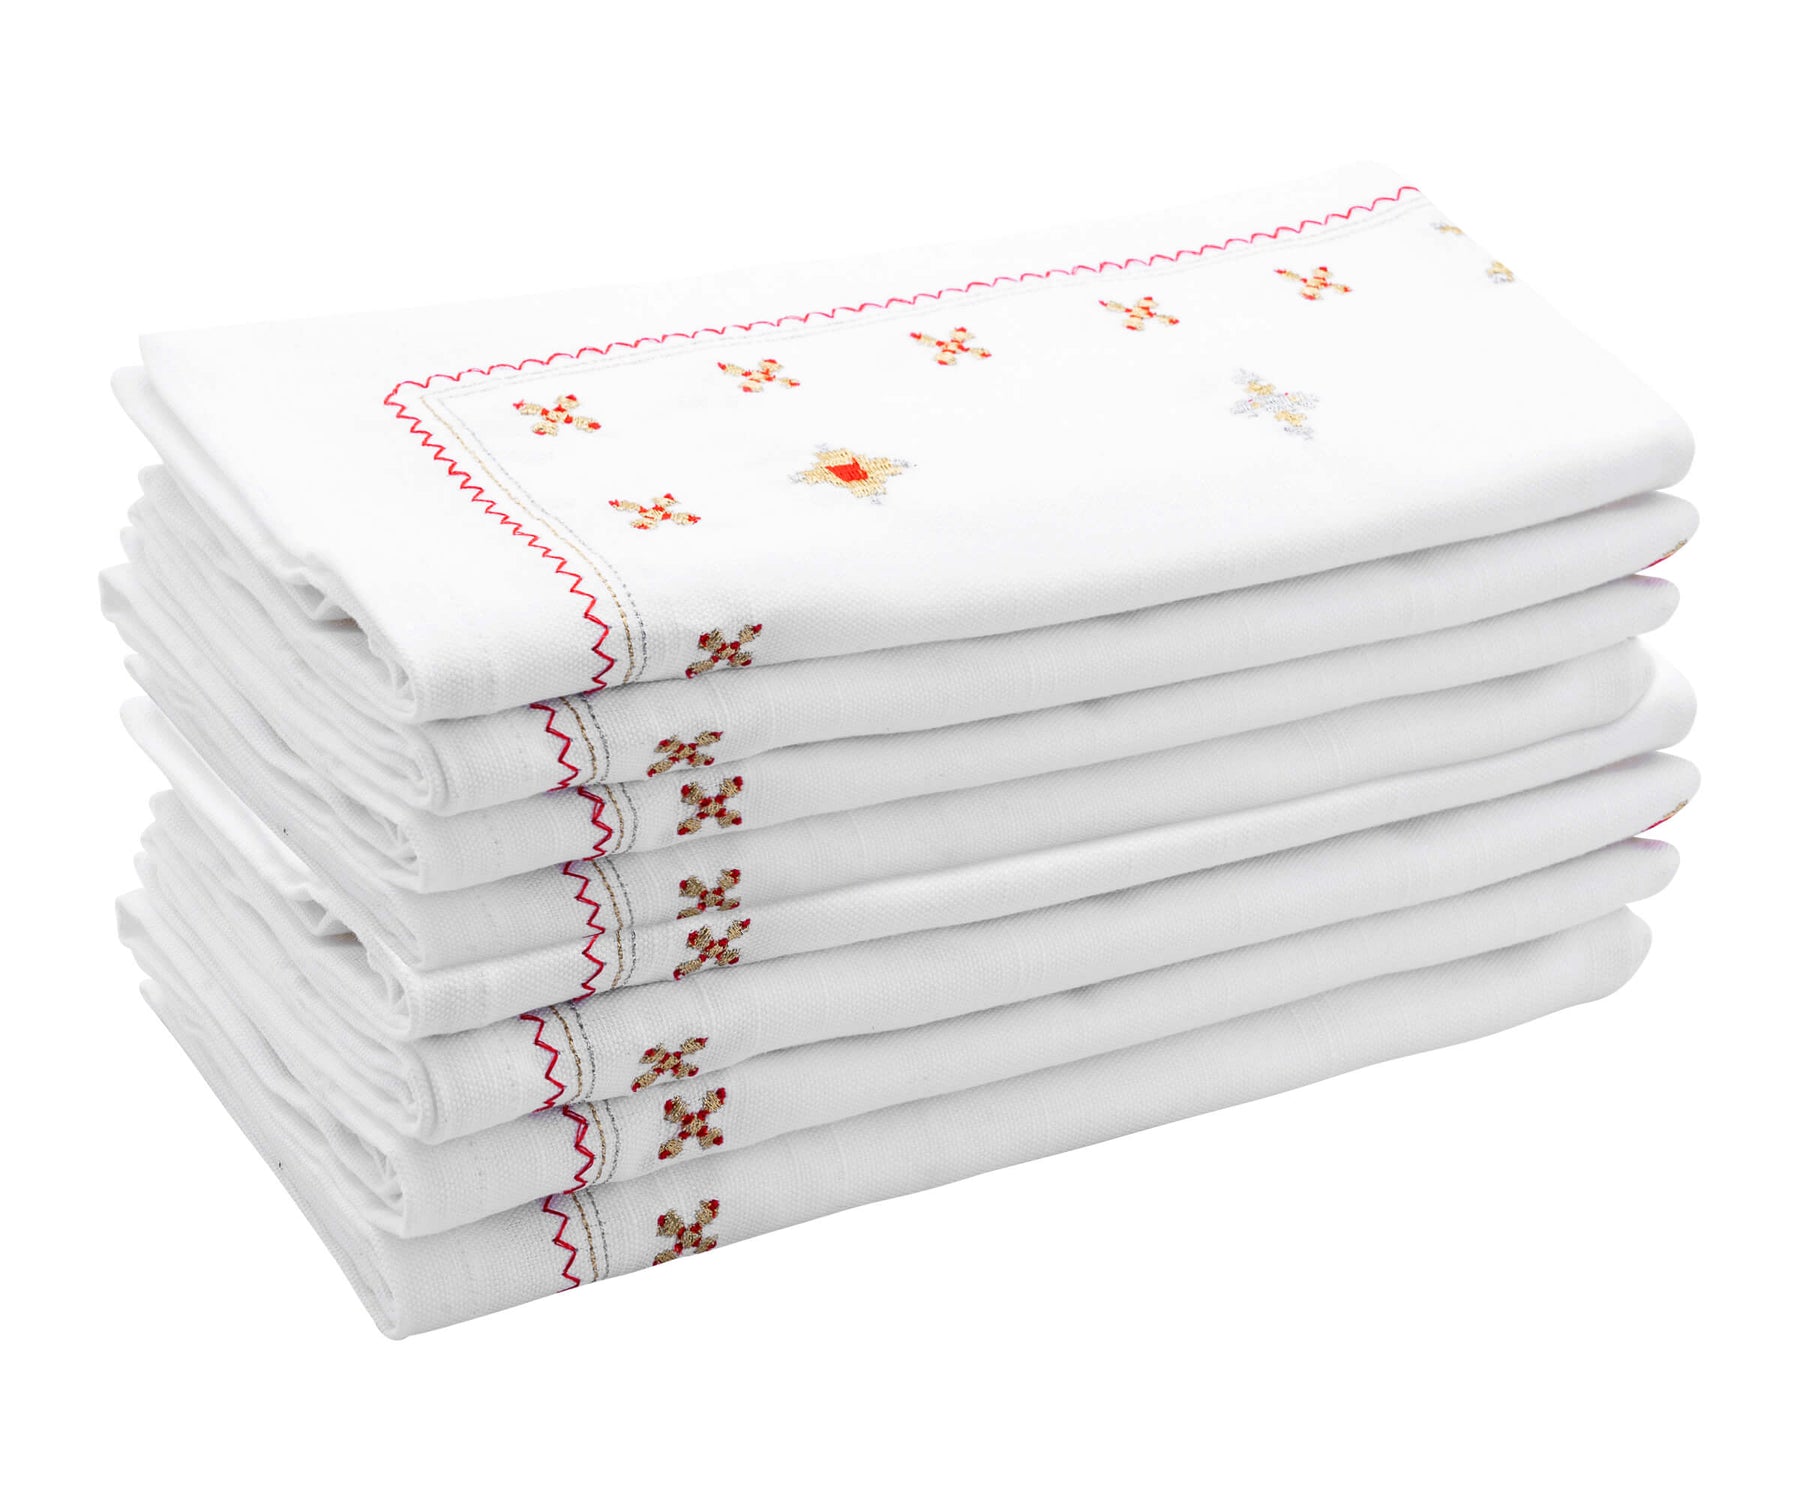 Red cotton napkins Some white napkins feature decorative elements like embossing, patterns, or borders for added visual appeal.